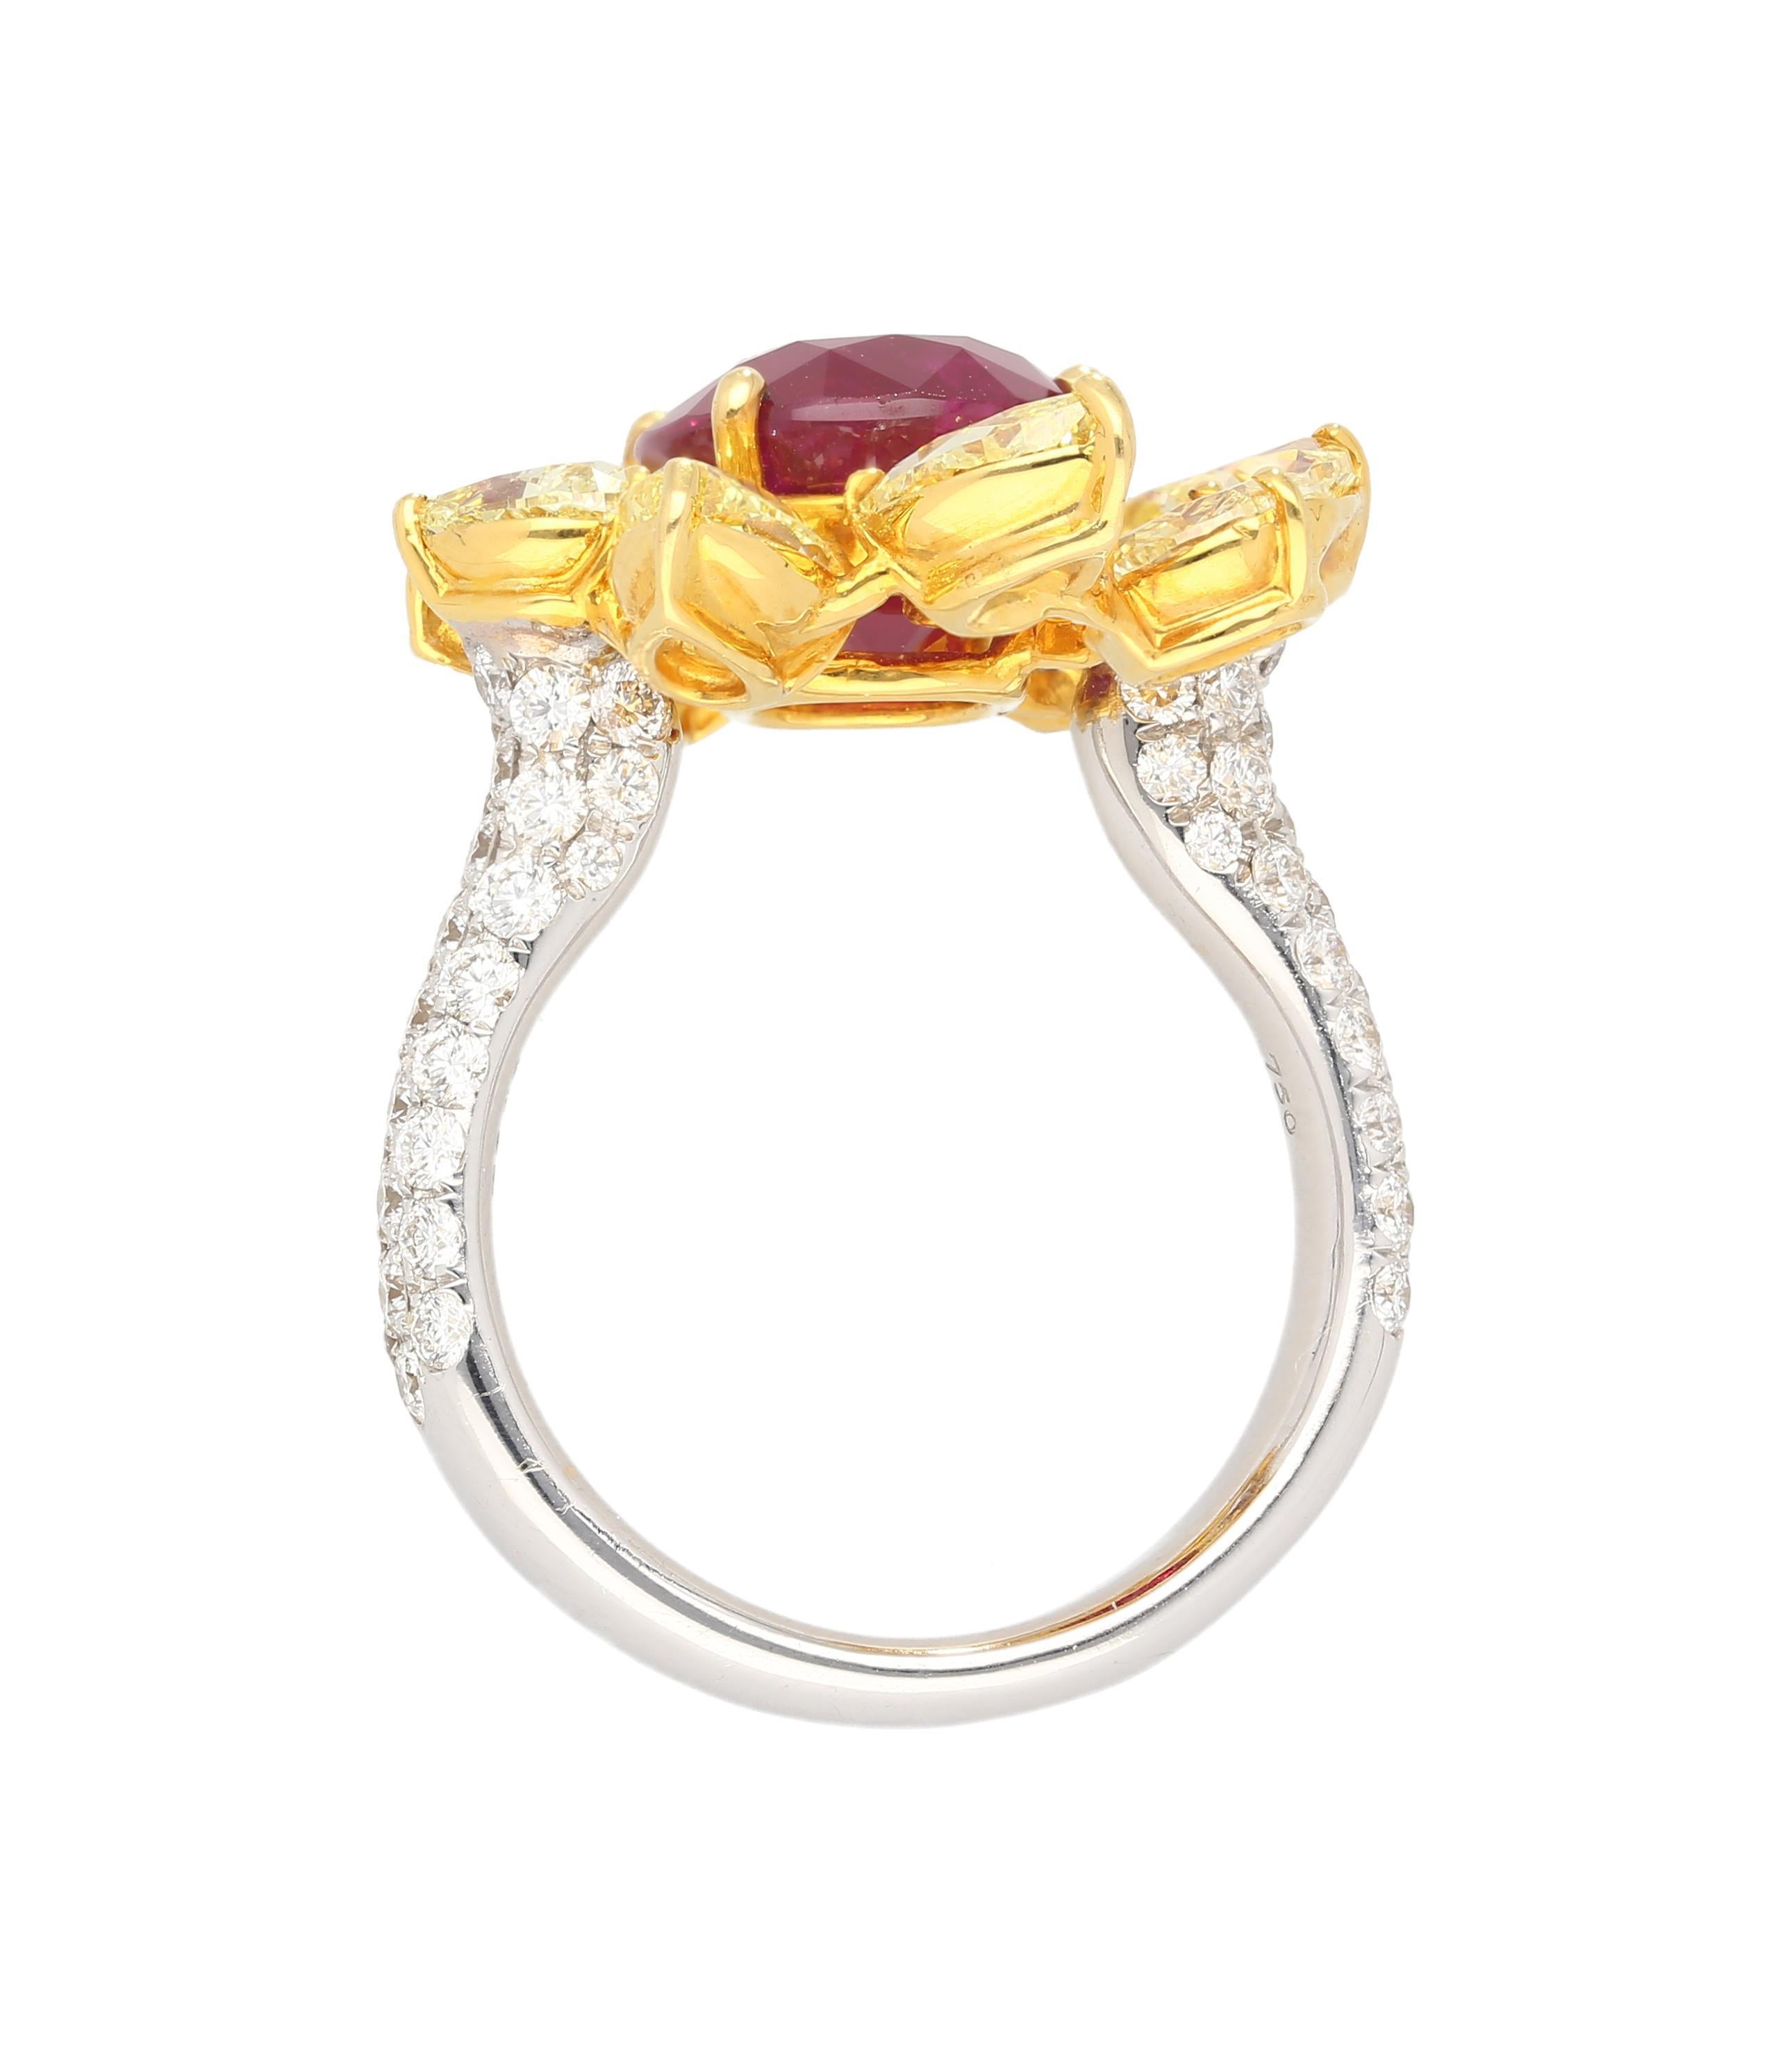 5.46 Carat Burma Ruby No Heat AGL Certified and Fancy Yellow Diamond Ring For Sale 6